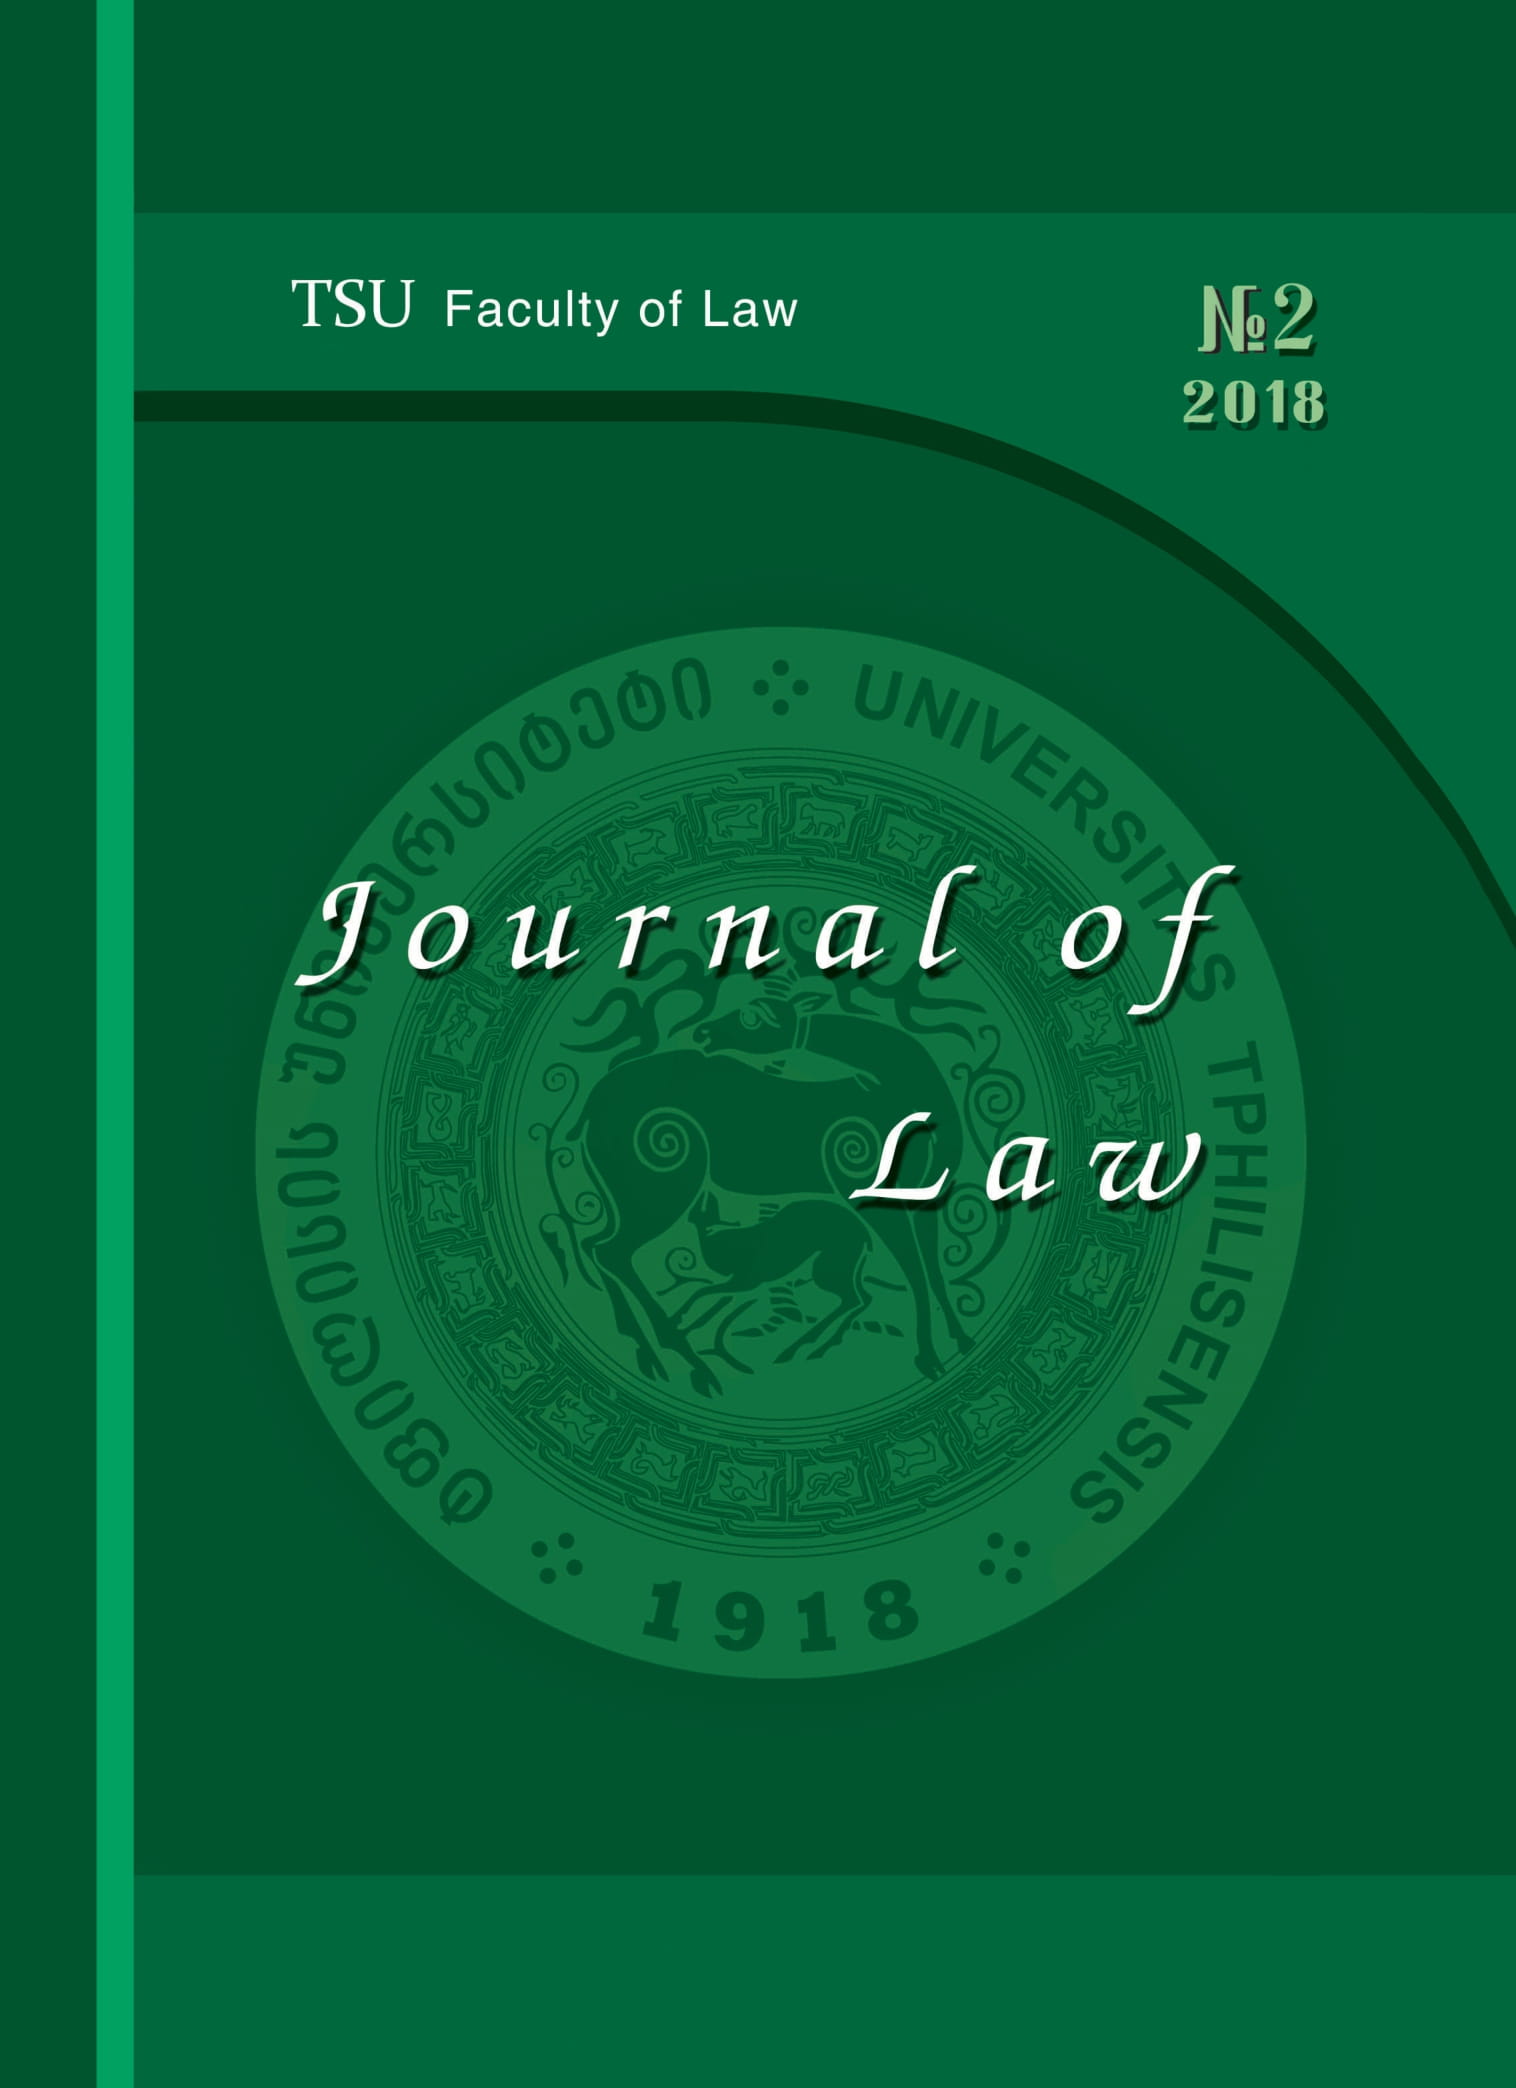 					View No. 2 (2018): Journal of Law
				